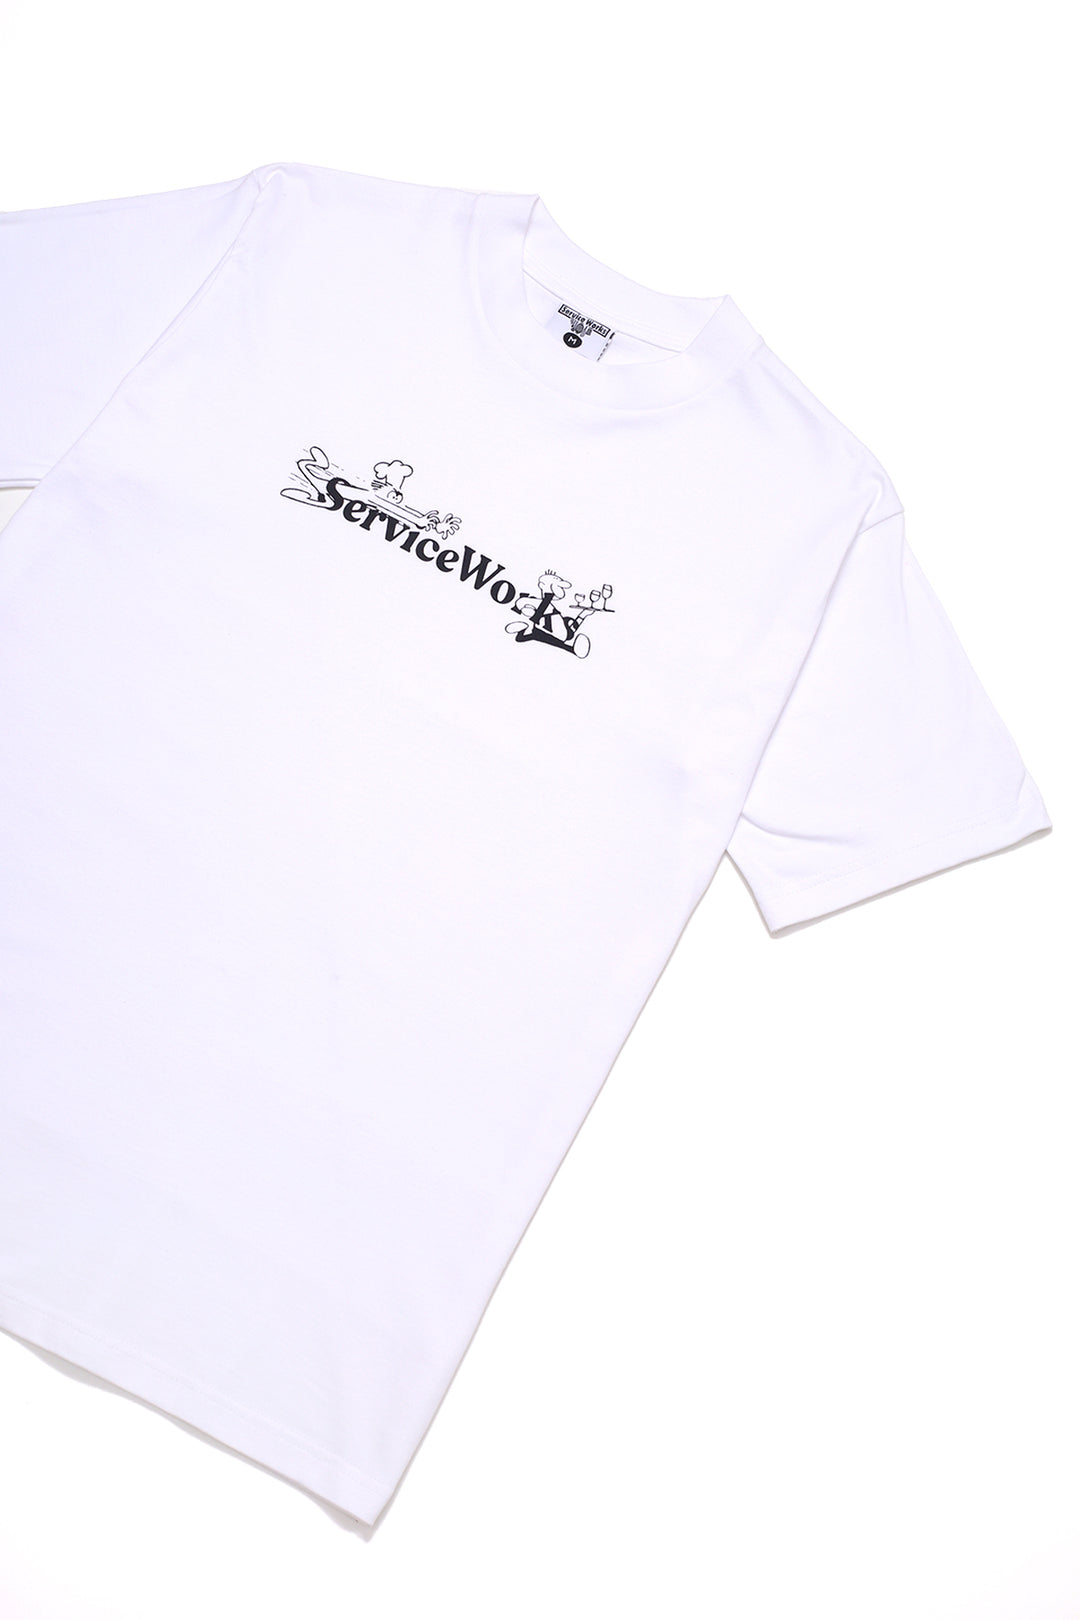 Service Works - Chase Tee - White